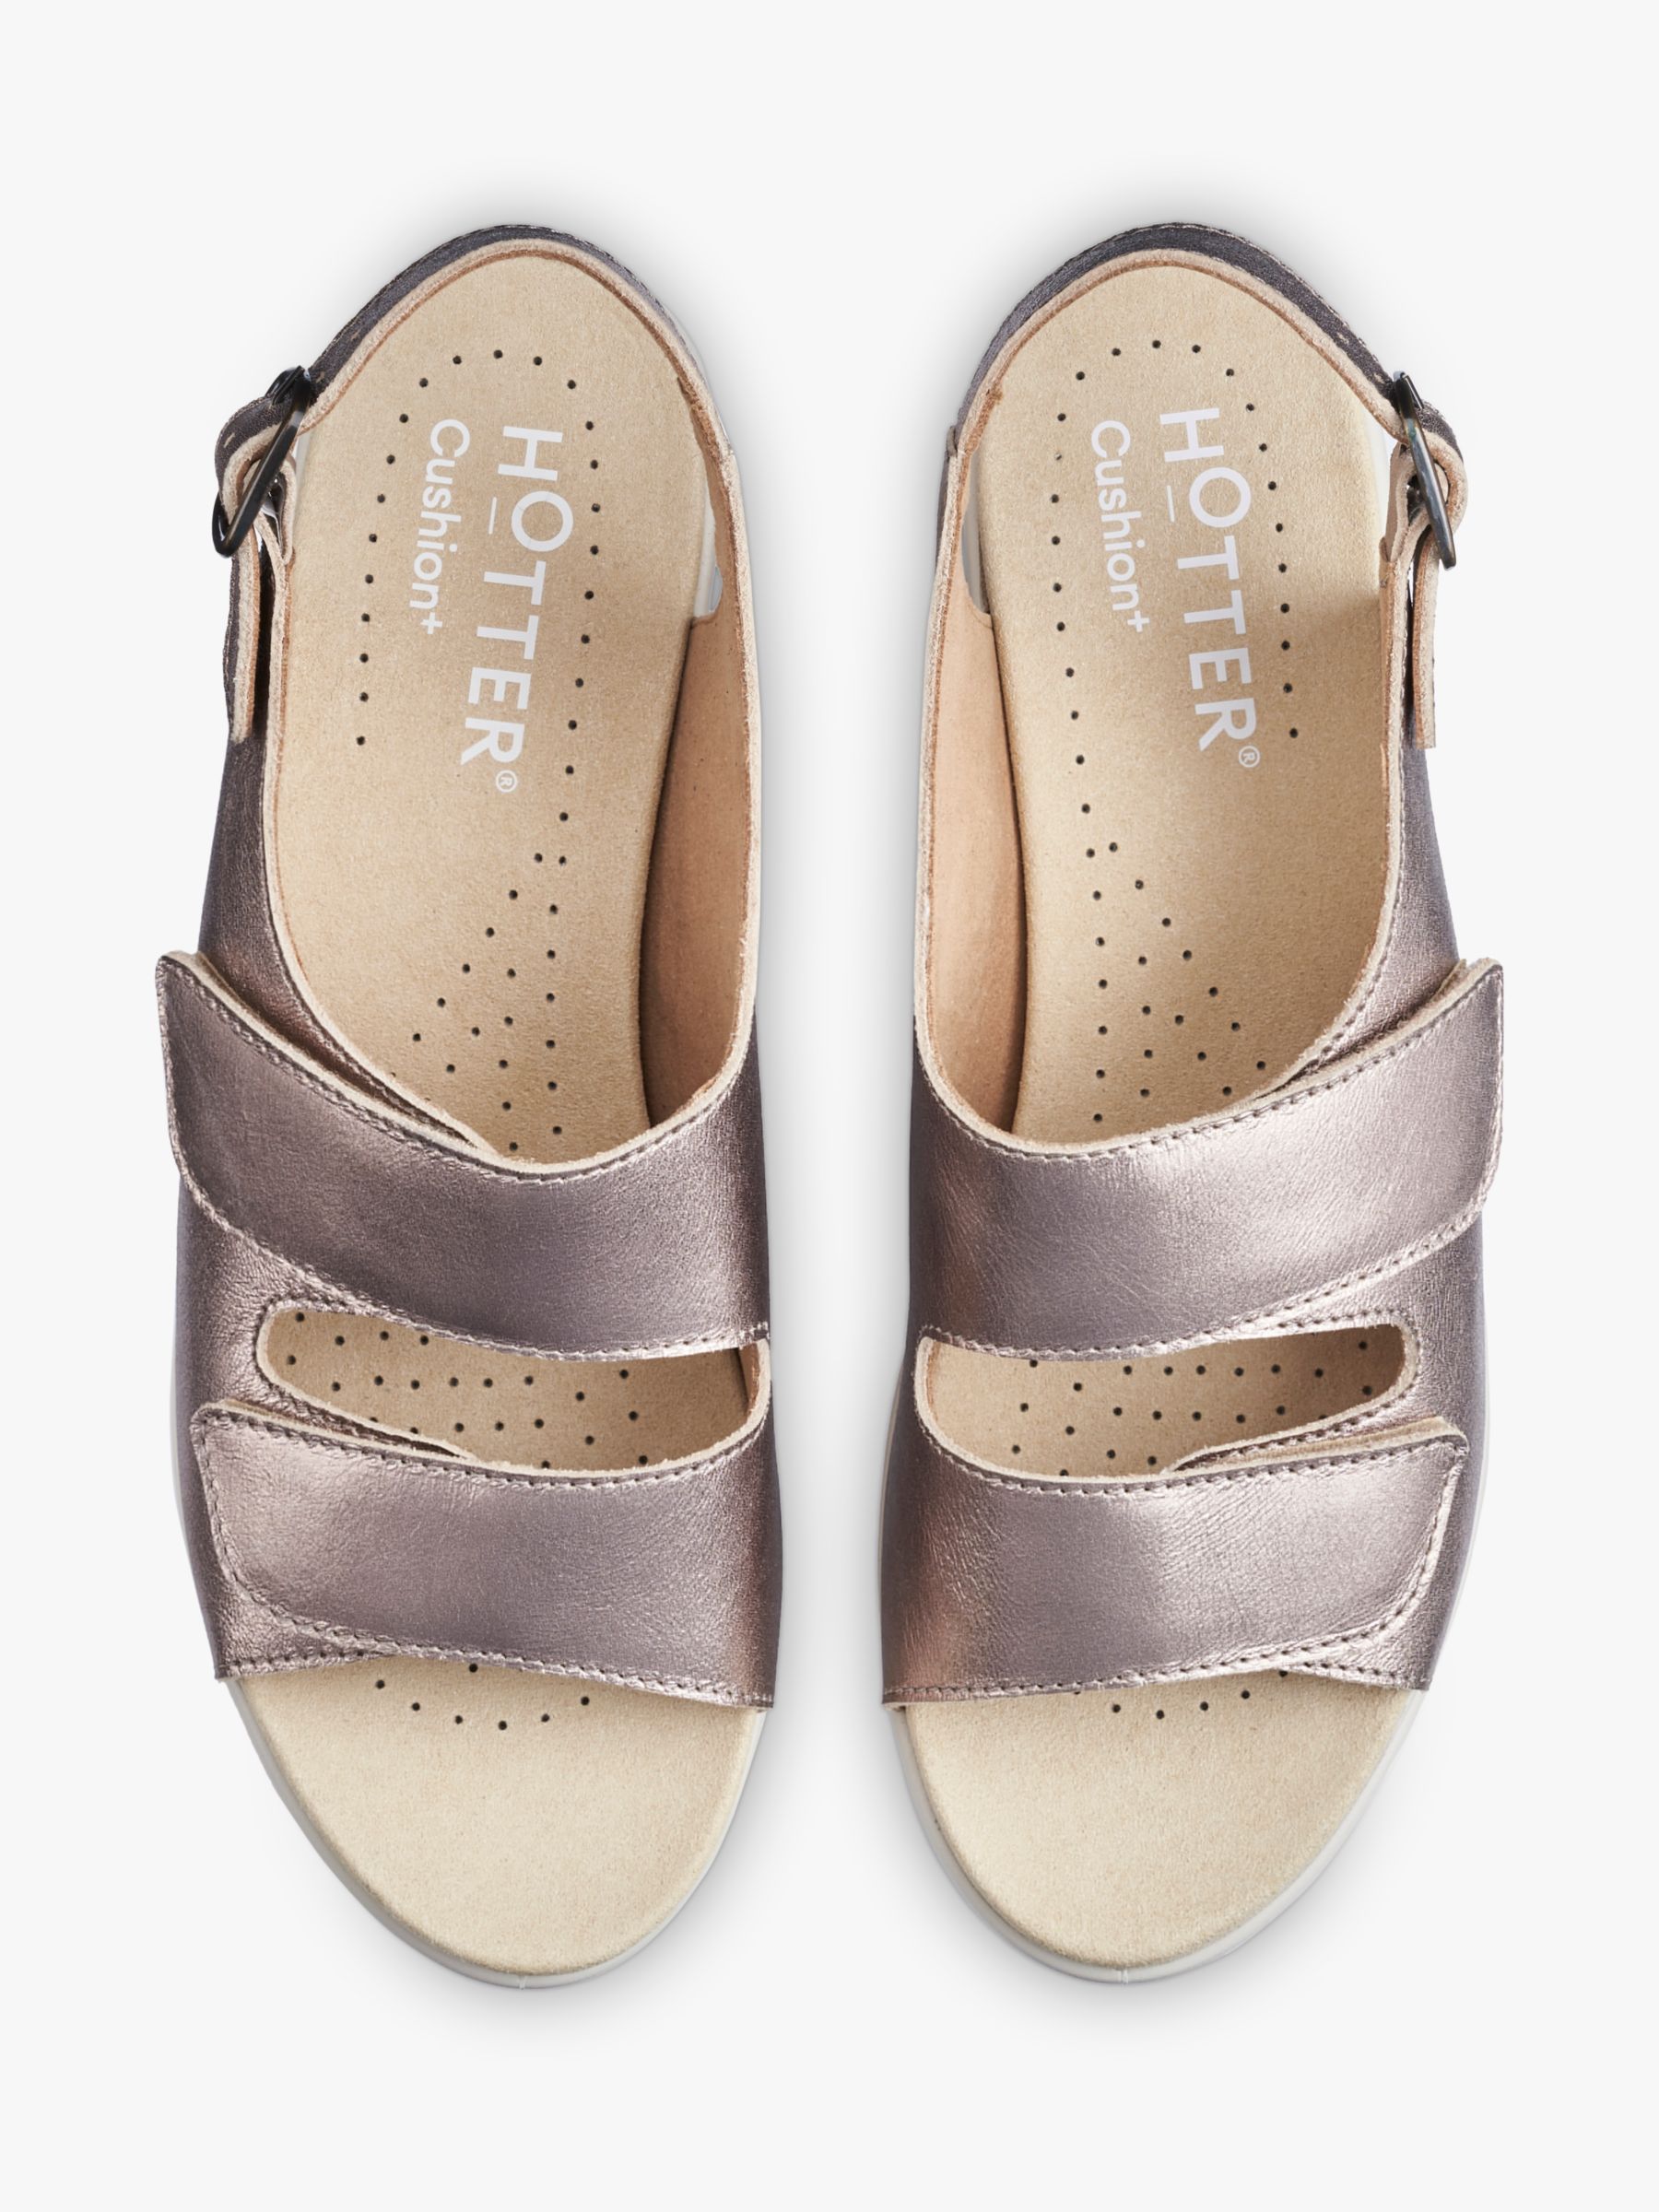 Buy Hotter Easy II Extra Wide Fit Low Wedge Leather Sandals, Rose Gold Online at johnlewis.com